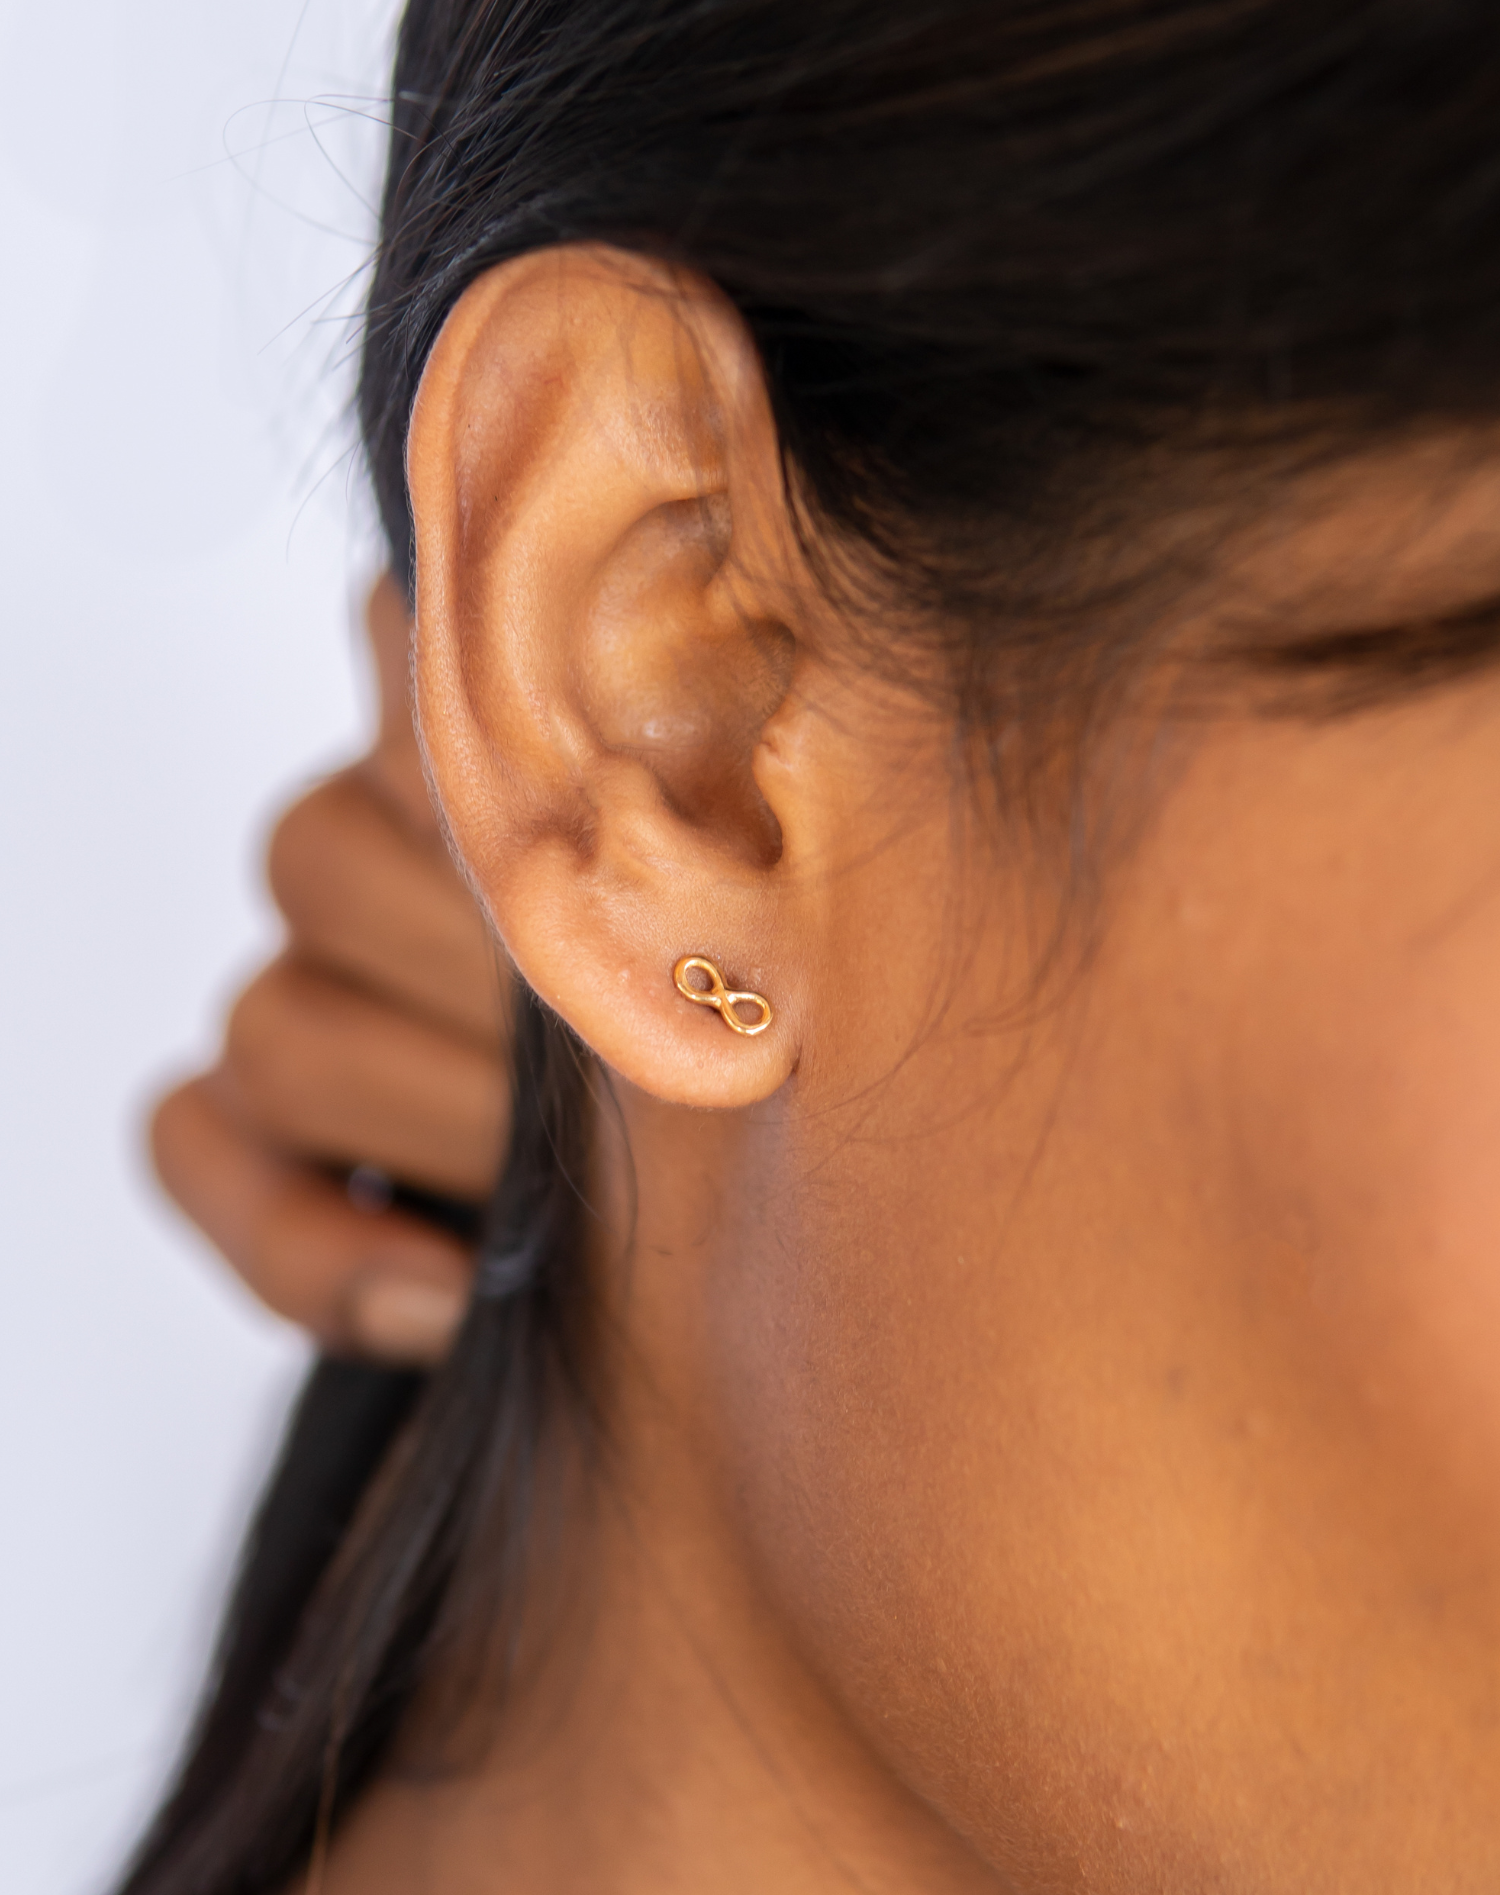 Buy Second Hole Earrings Online In India - Etsy India